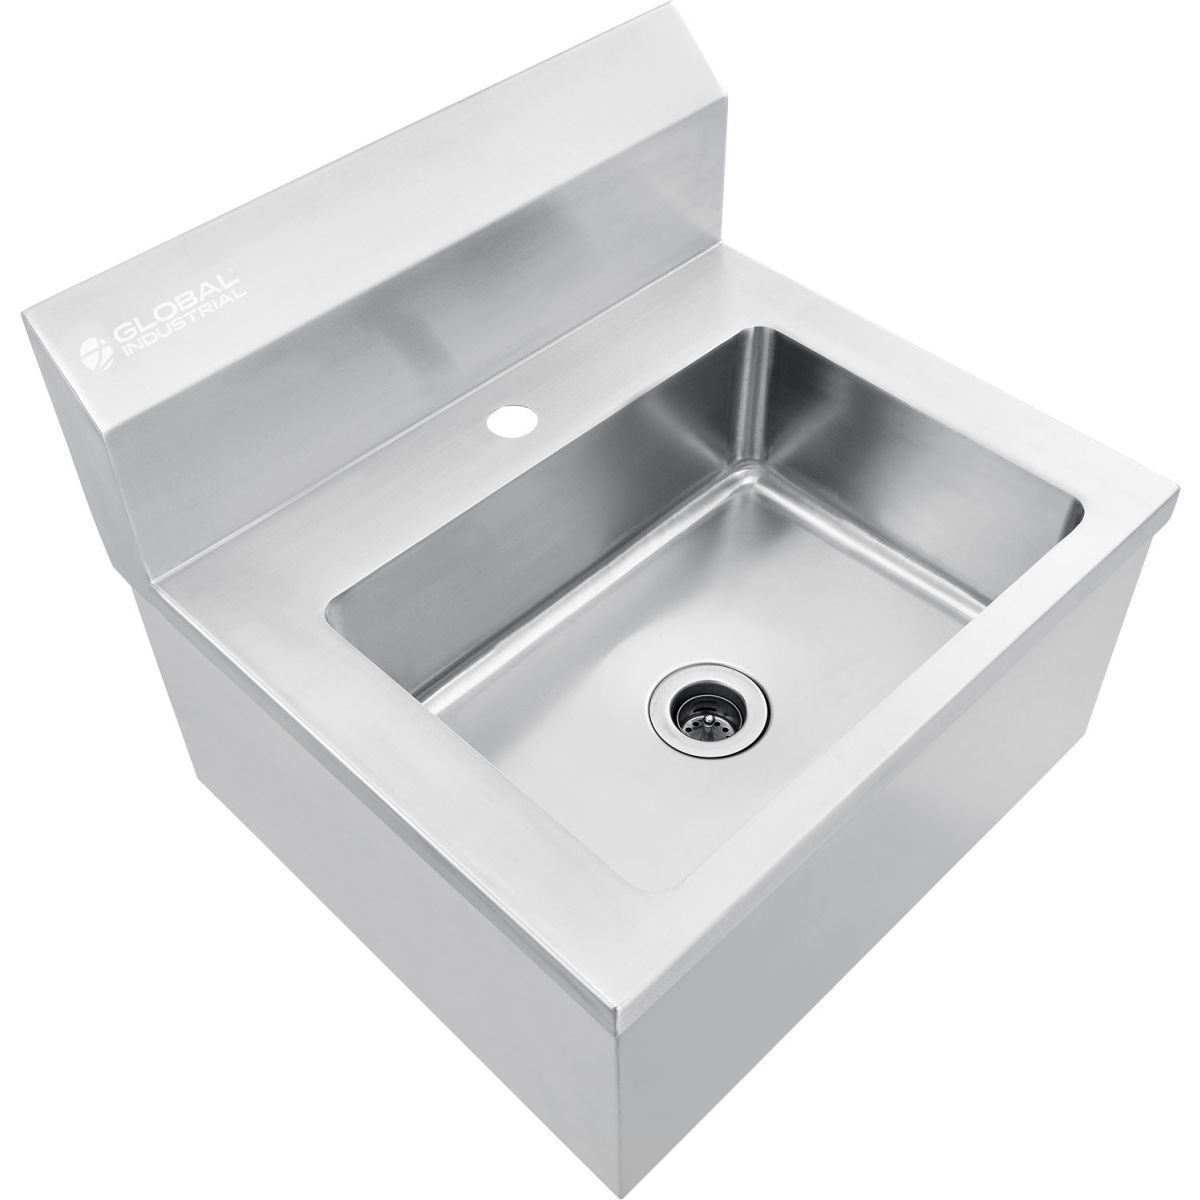 670458 Global Industrial Stainless Steel Hands Free Wall Mount Sink - 14 x 10 x 5 in -  Ningbo Yinzhou Haisland Machinery